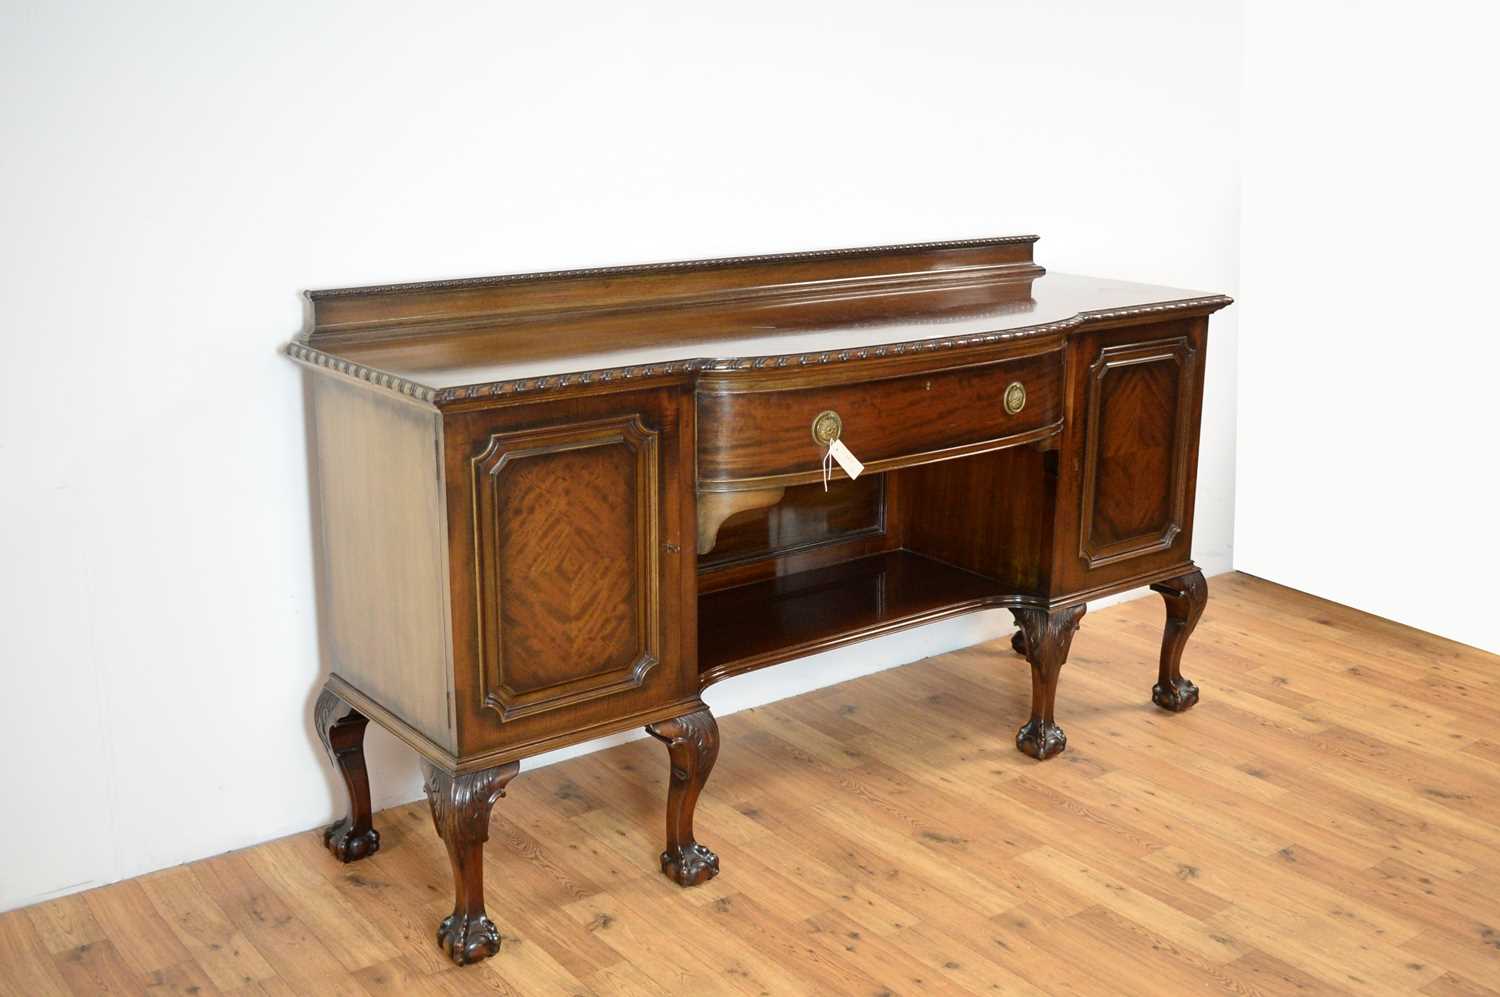 Waring and Gillows: An early 20th century mahogany bowfront sideboard - Image 2 of 4